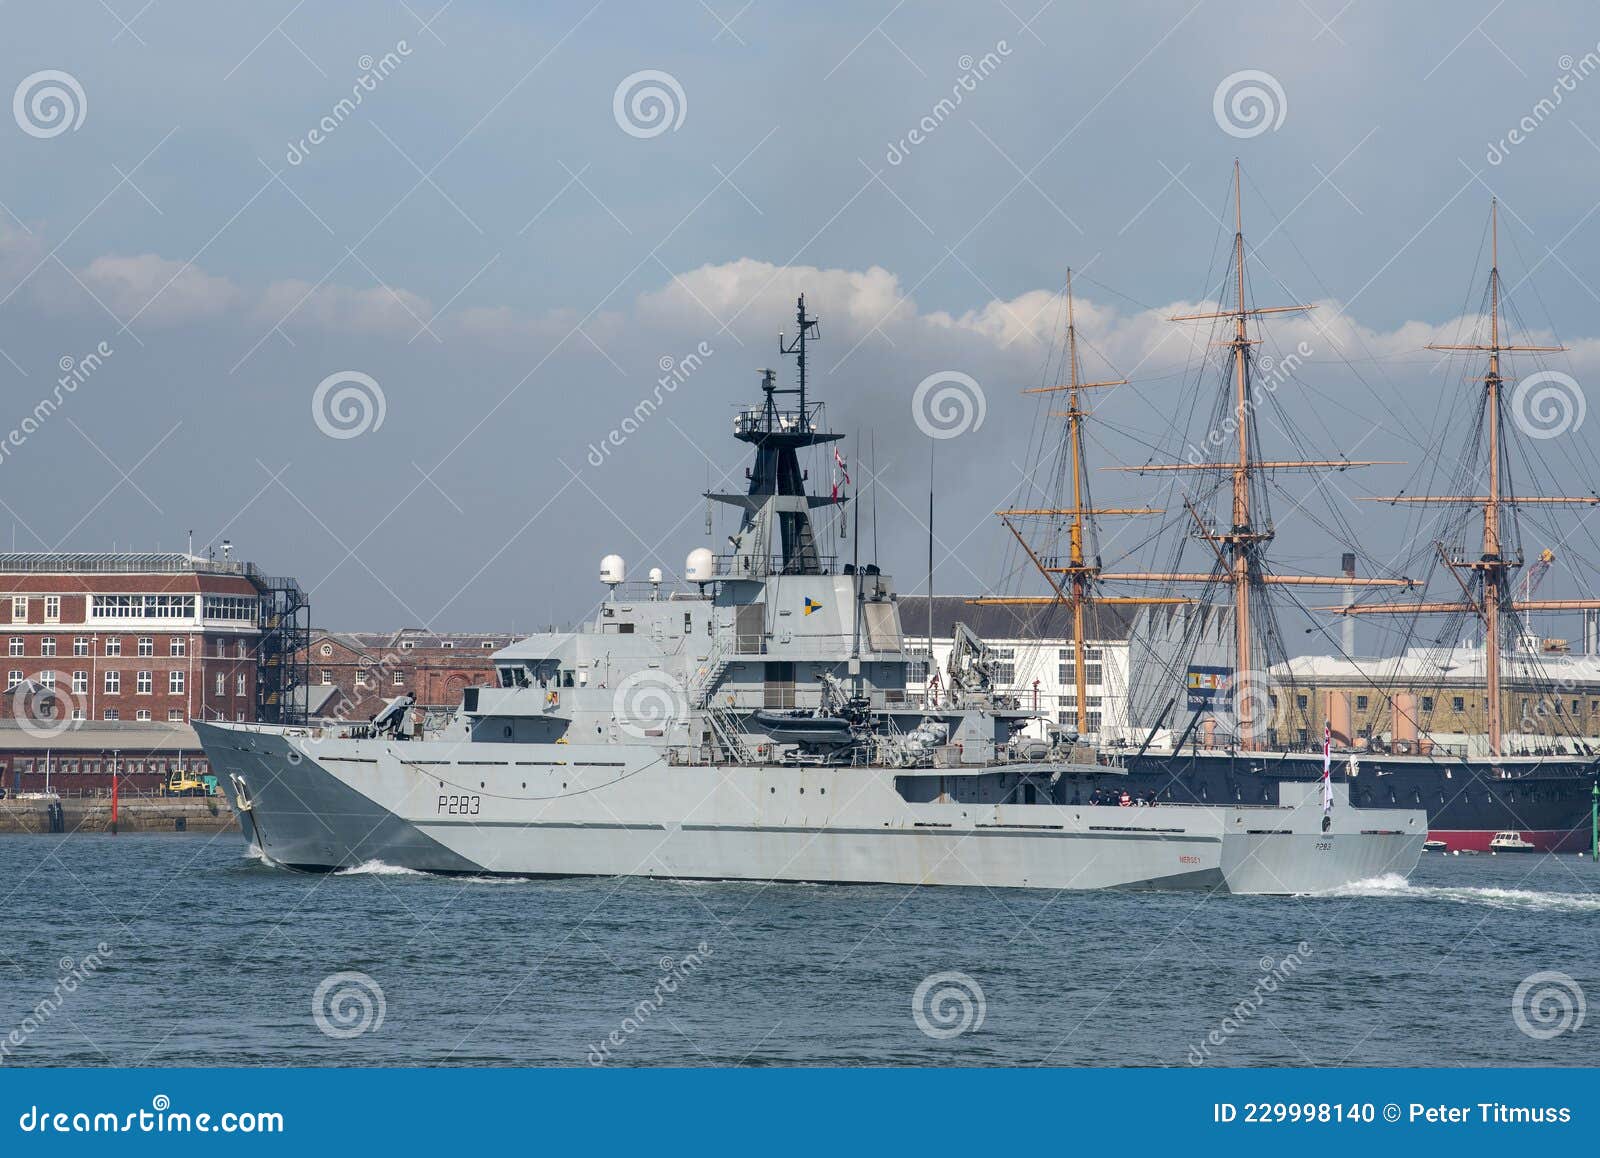 https://thumbs.dreamstime.com/z/portsmouth-england-uk-hms-mersey-p-river-class-offshore-patrol-vessel-protects-british-fishing-rights-returns-to-portsmouth-229998140.jpg